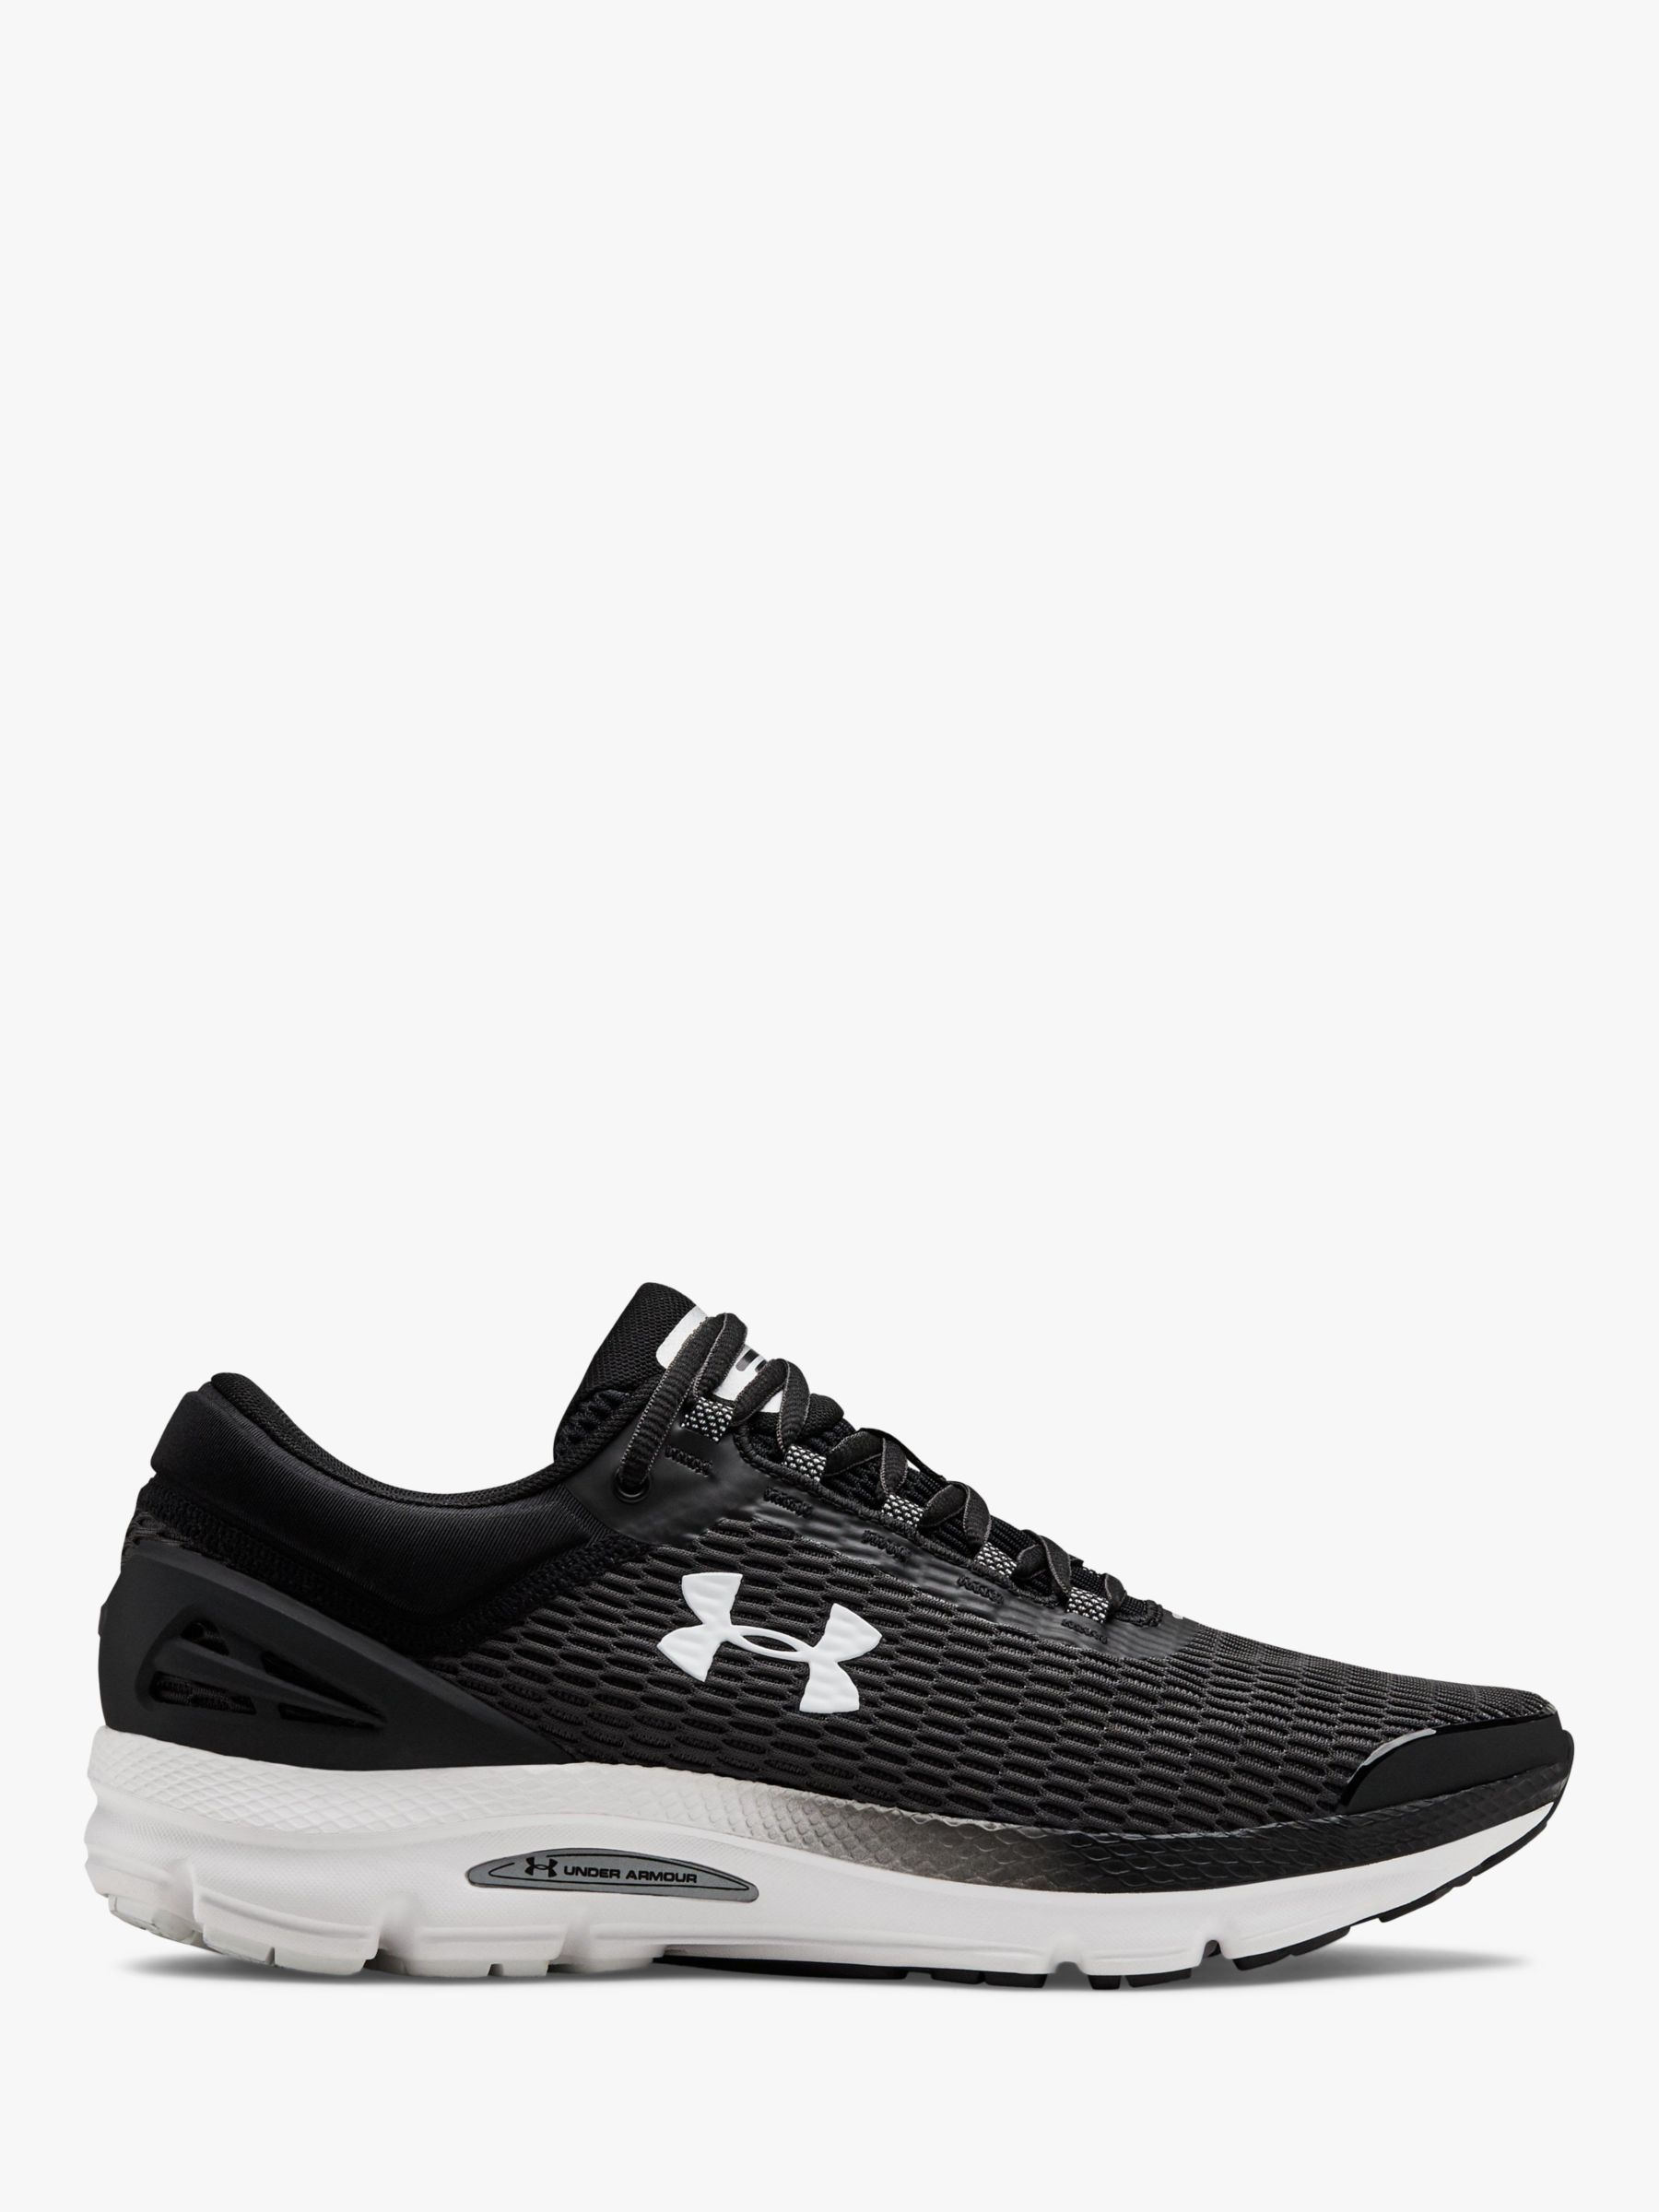 Under Armour Charged Intake 3 Men's Running Shoes, Black/White